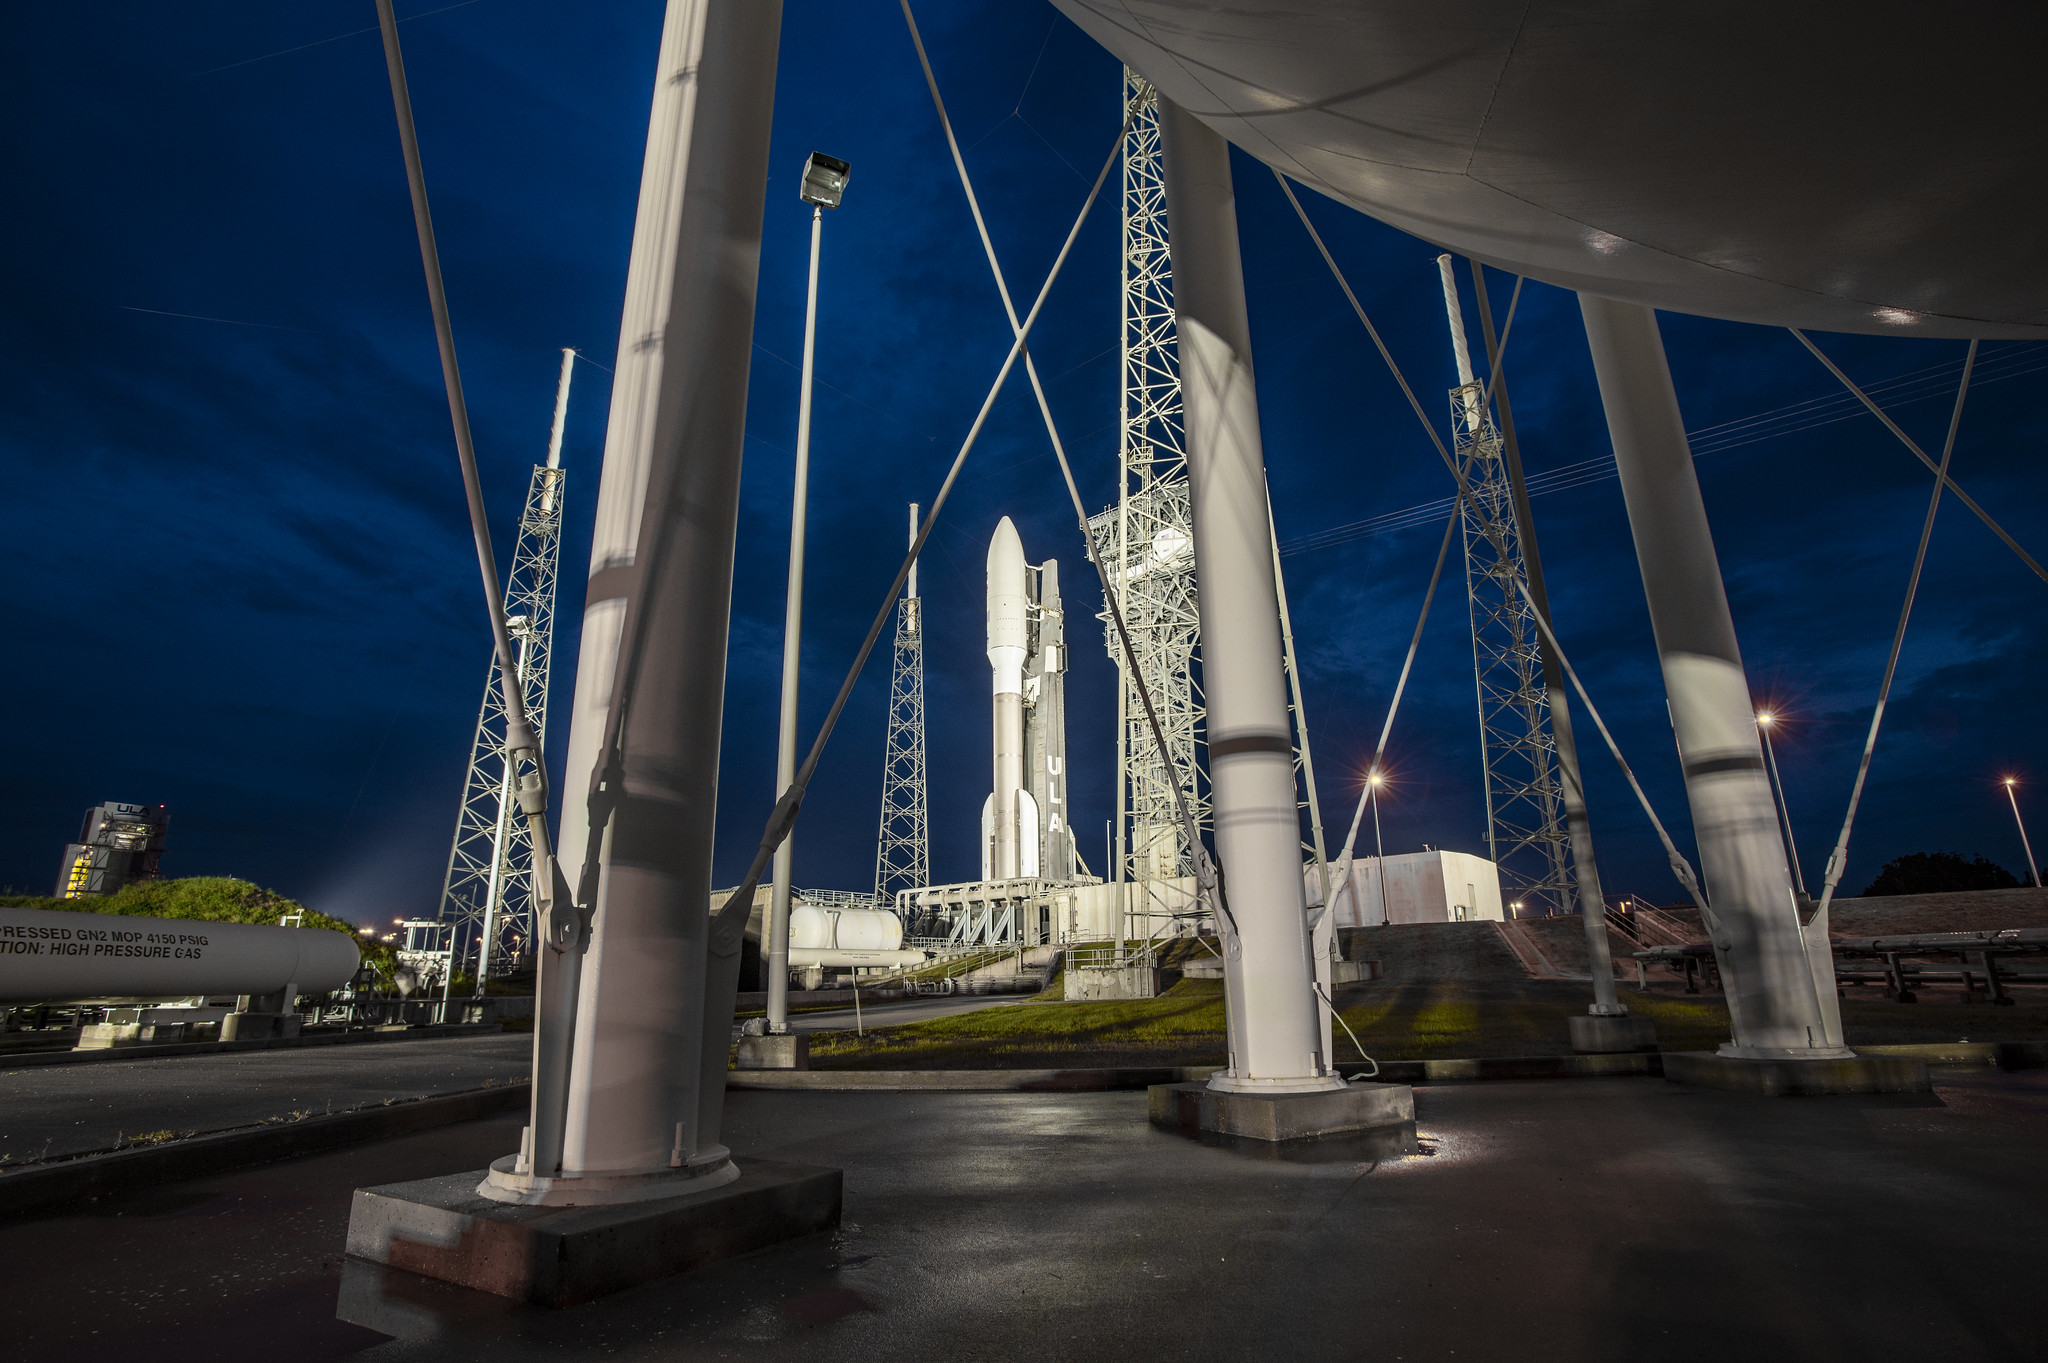 ULA's Atlas V rocket sits on the launch pad on July 28, 2020, ready to launch NASA's Mars 2020 Perseverance rover to Mar July 30, 3030.